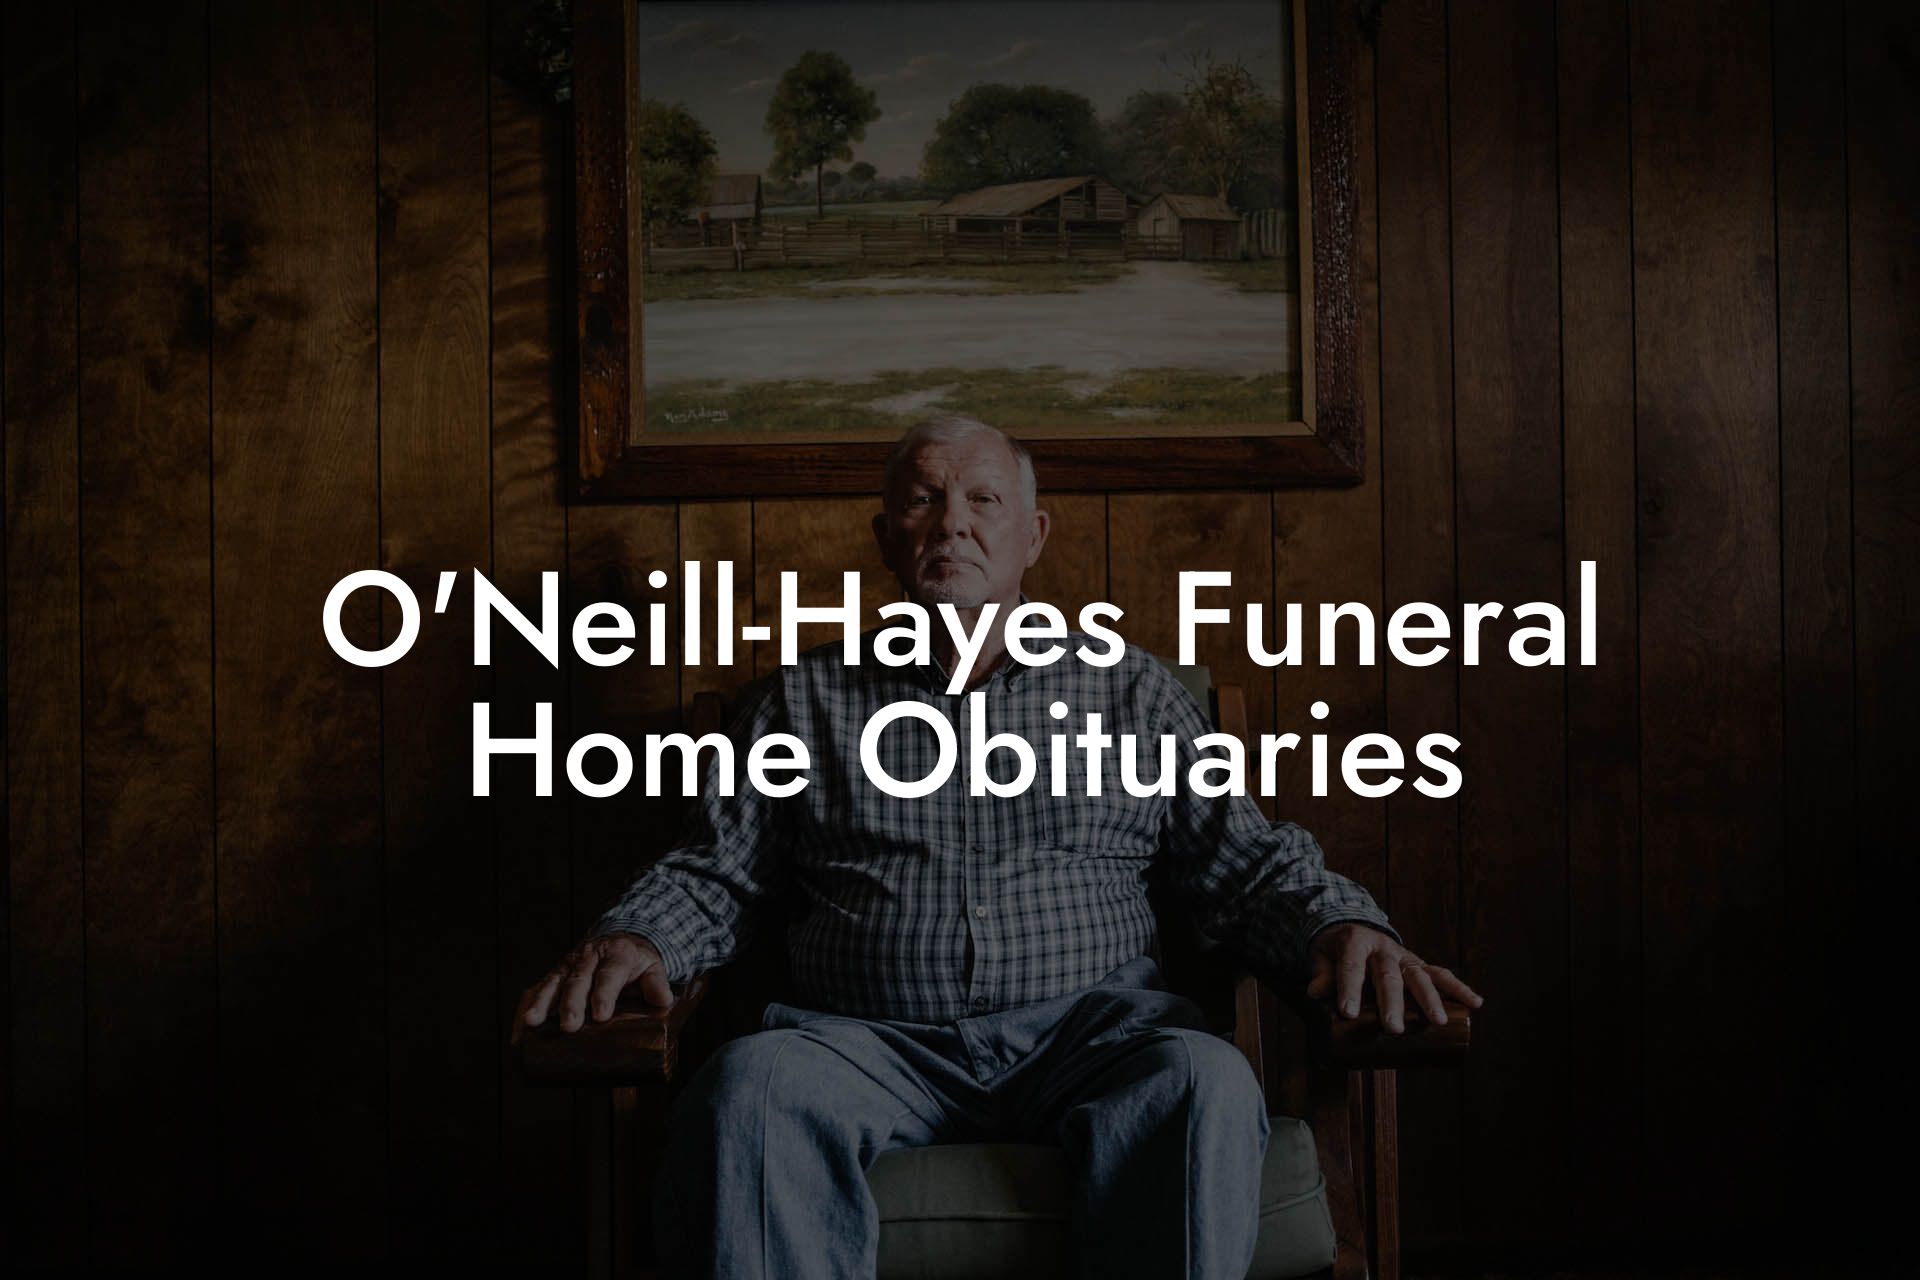 O'Neill-Hayes Funeral Home Obituaries